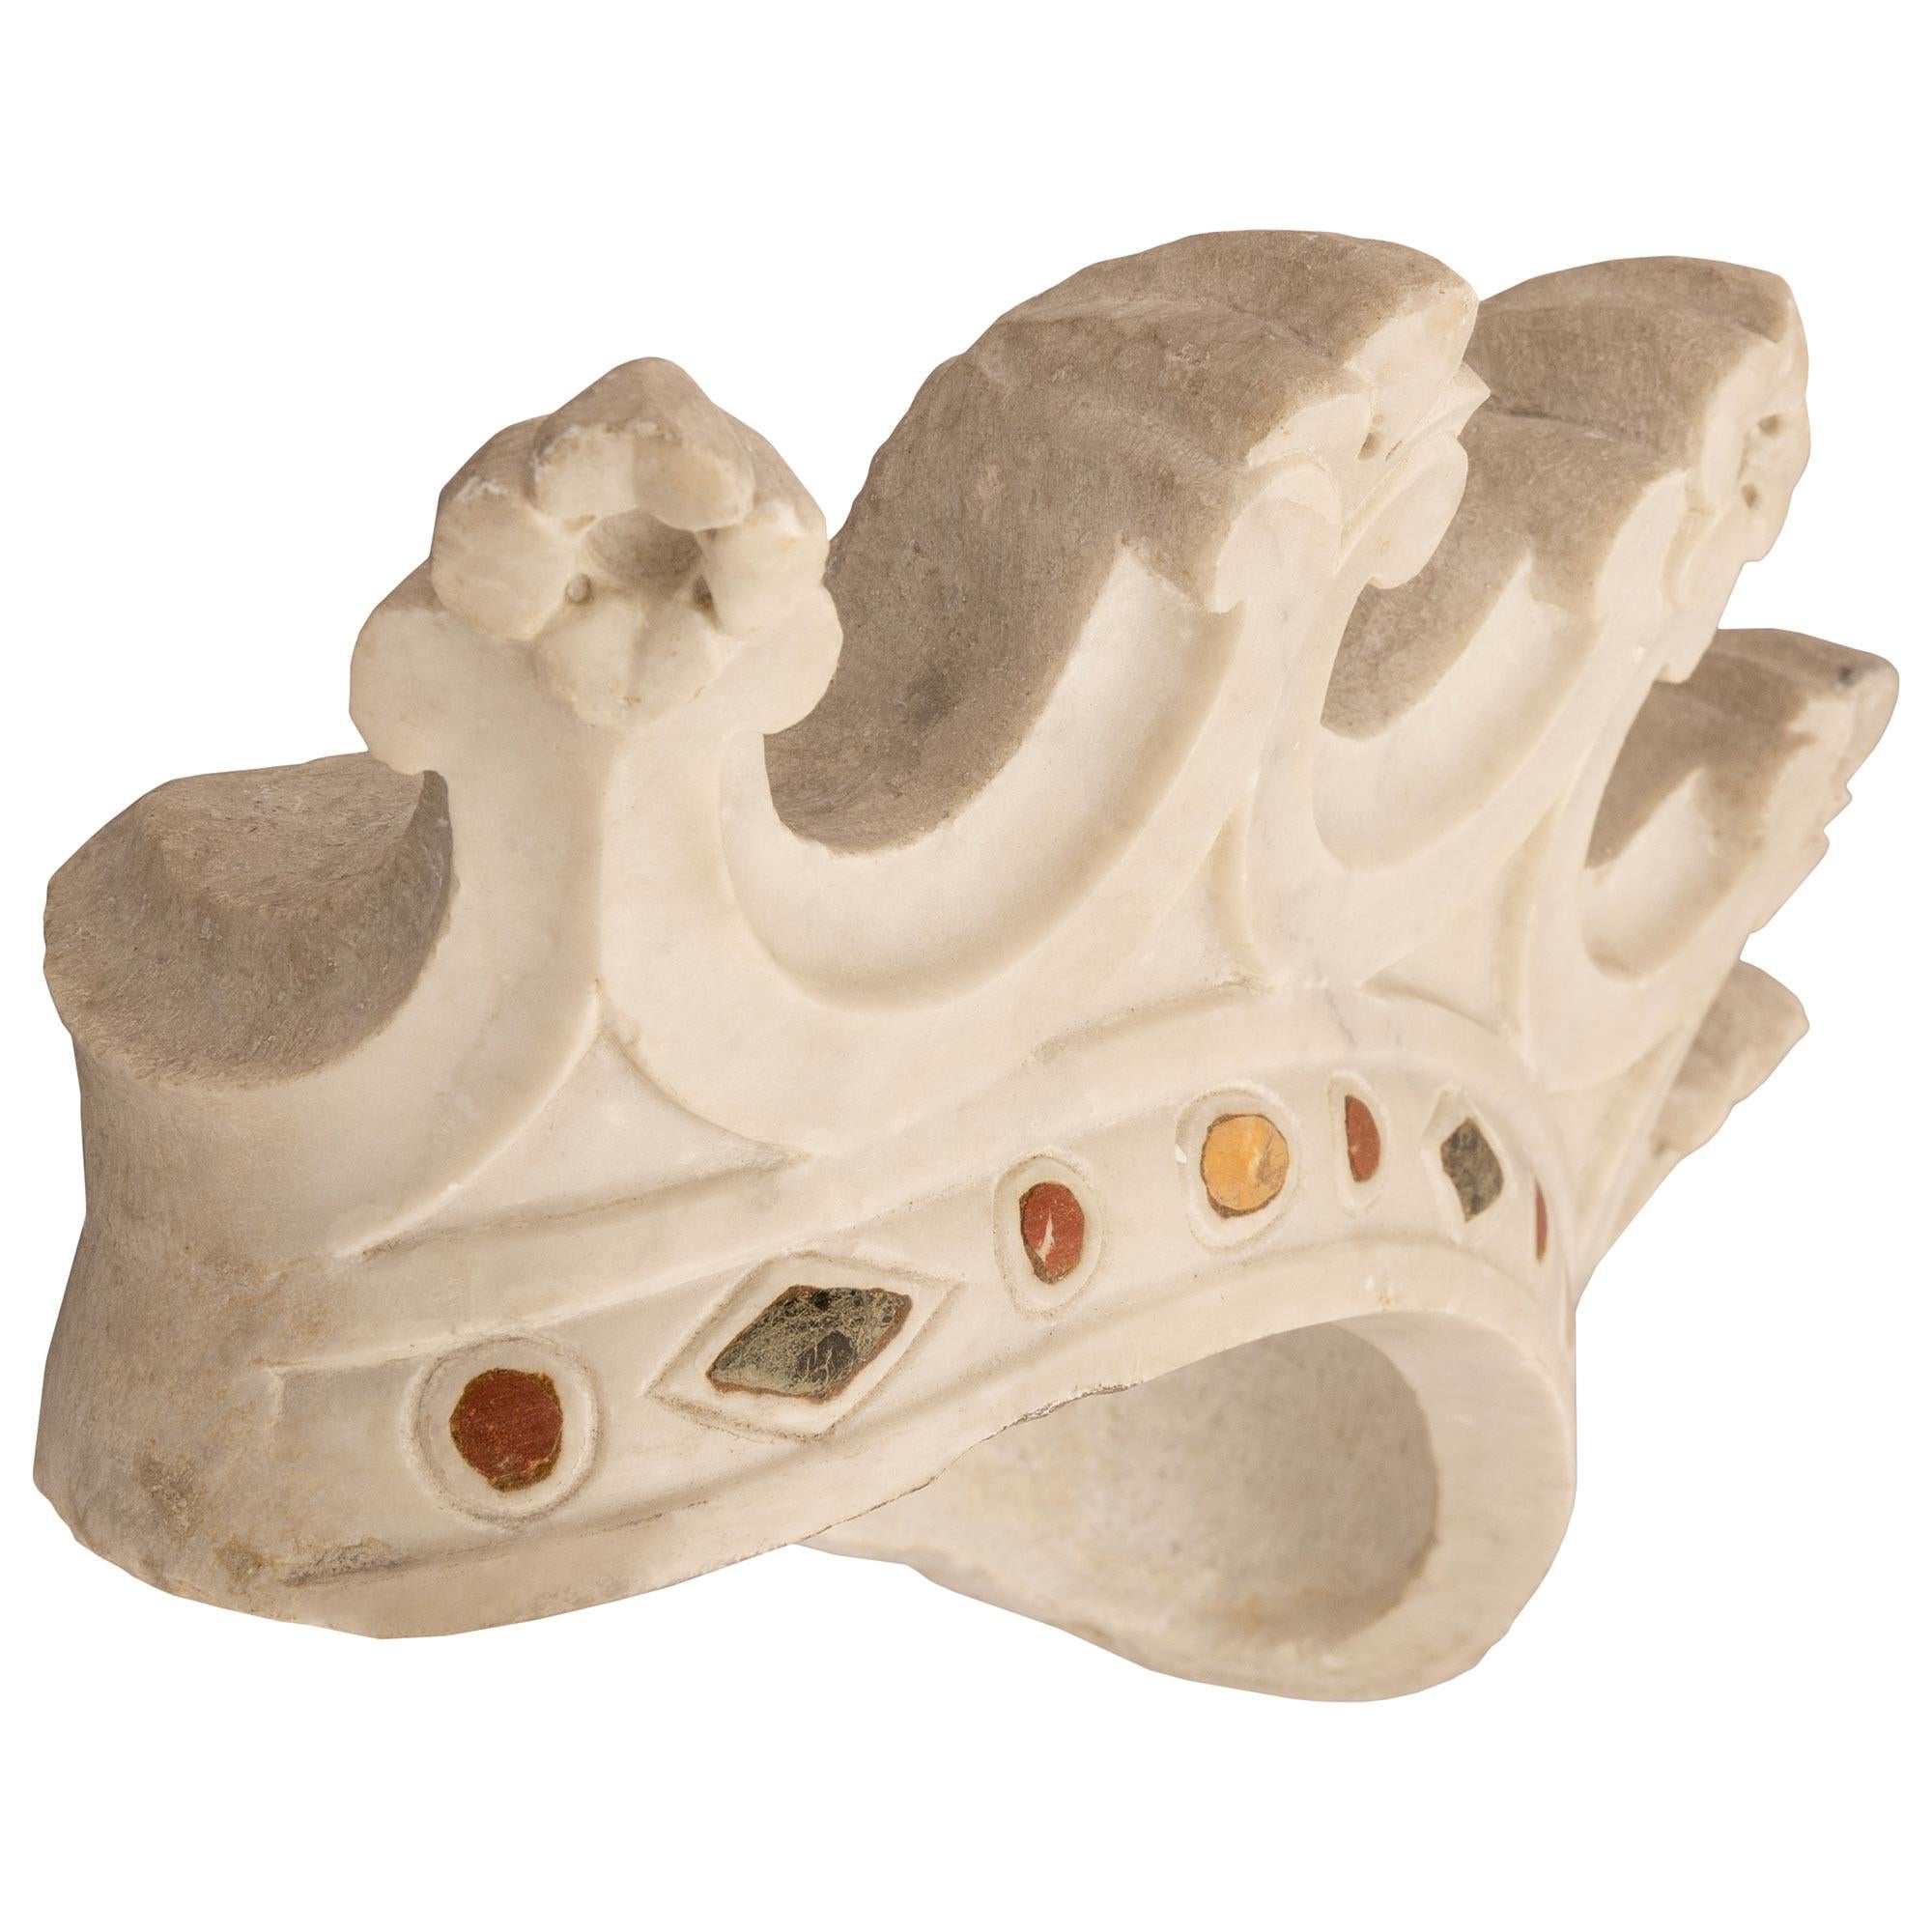 Italian 19th Century Architectural Wall Element Of A Crown In Good Condition For Sale In West Palm Beach, FL